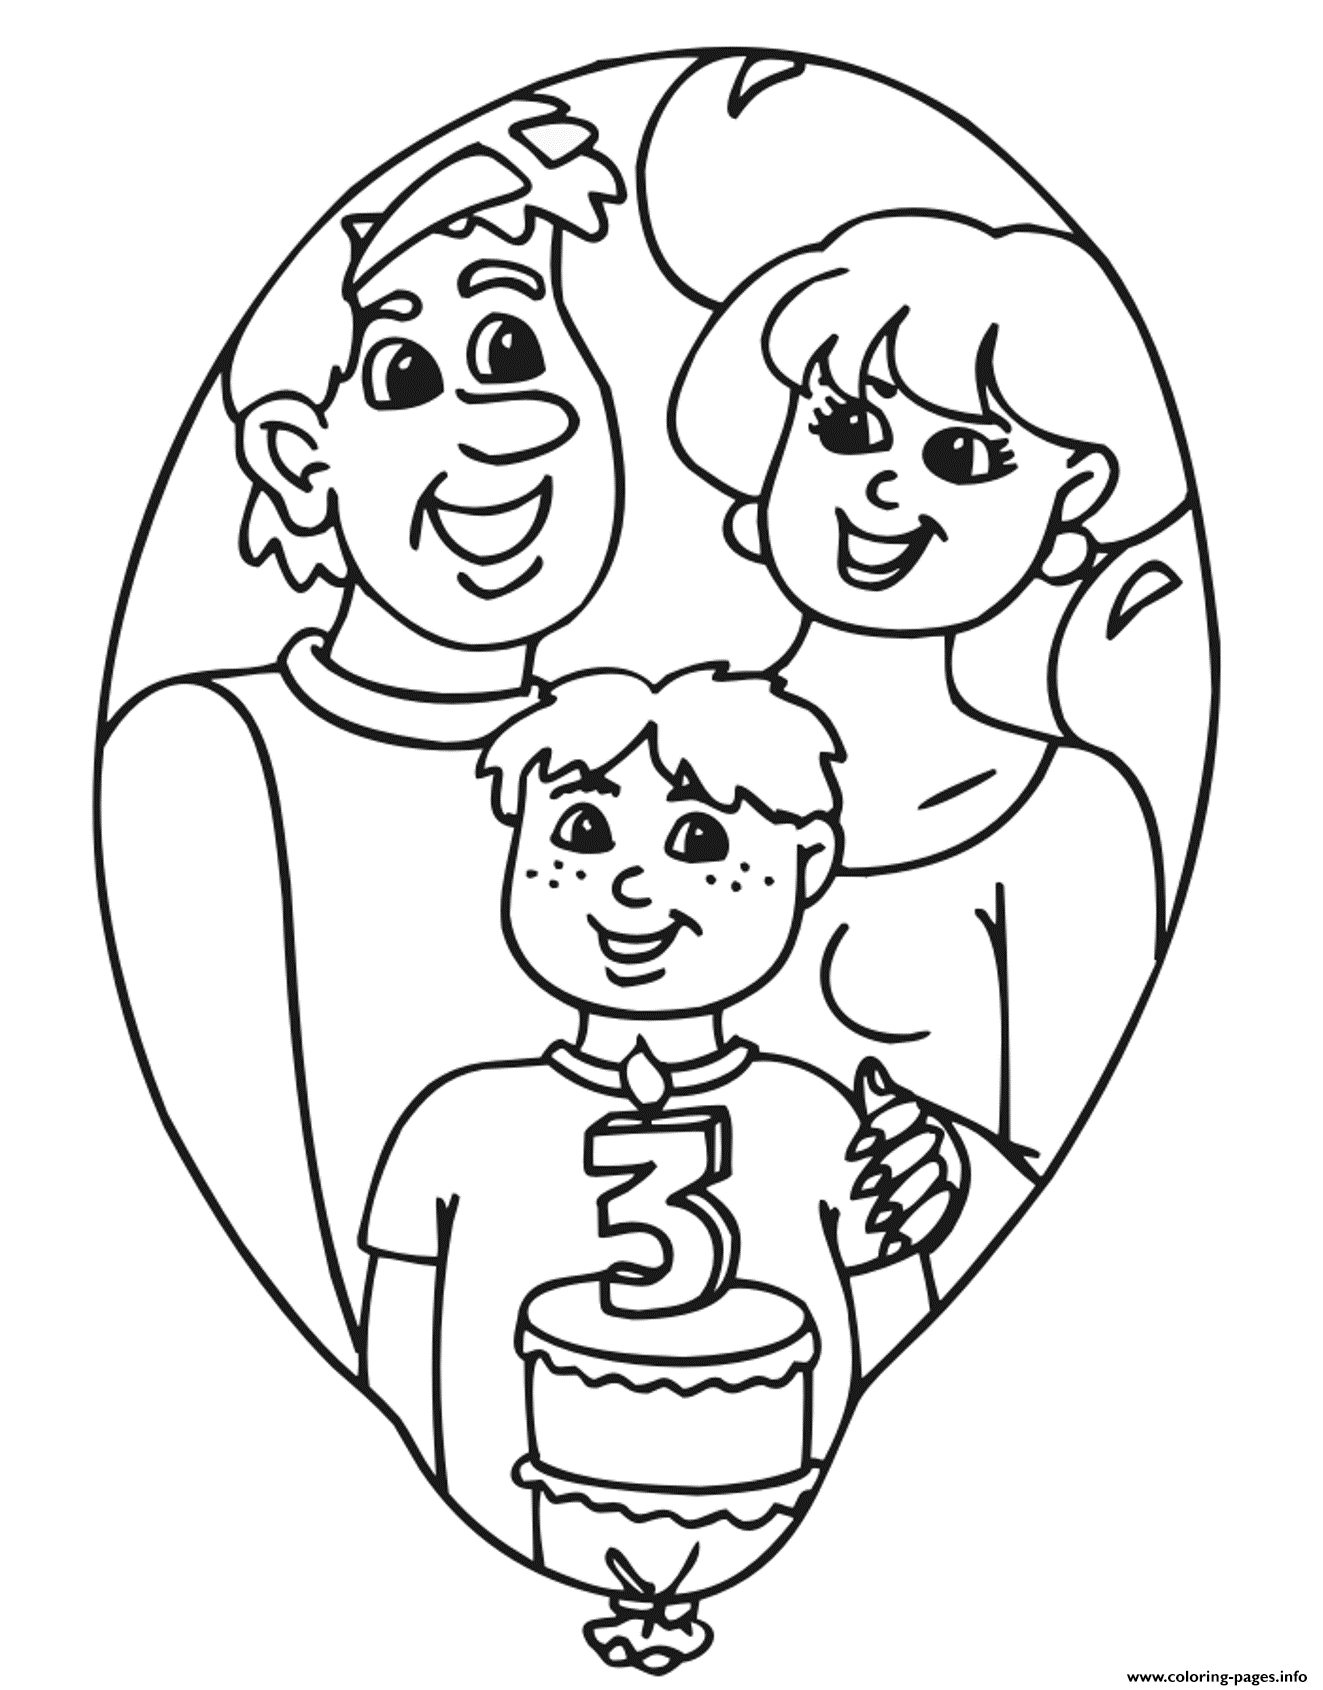 Free Birthday S With Mom And Dad7e47 coloring